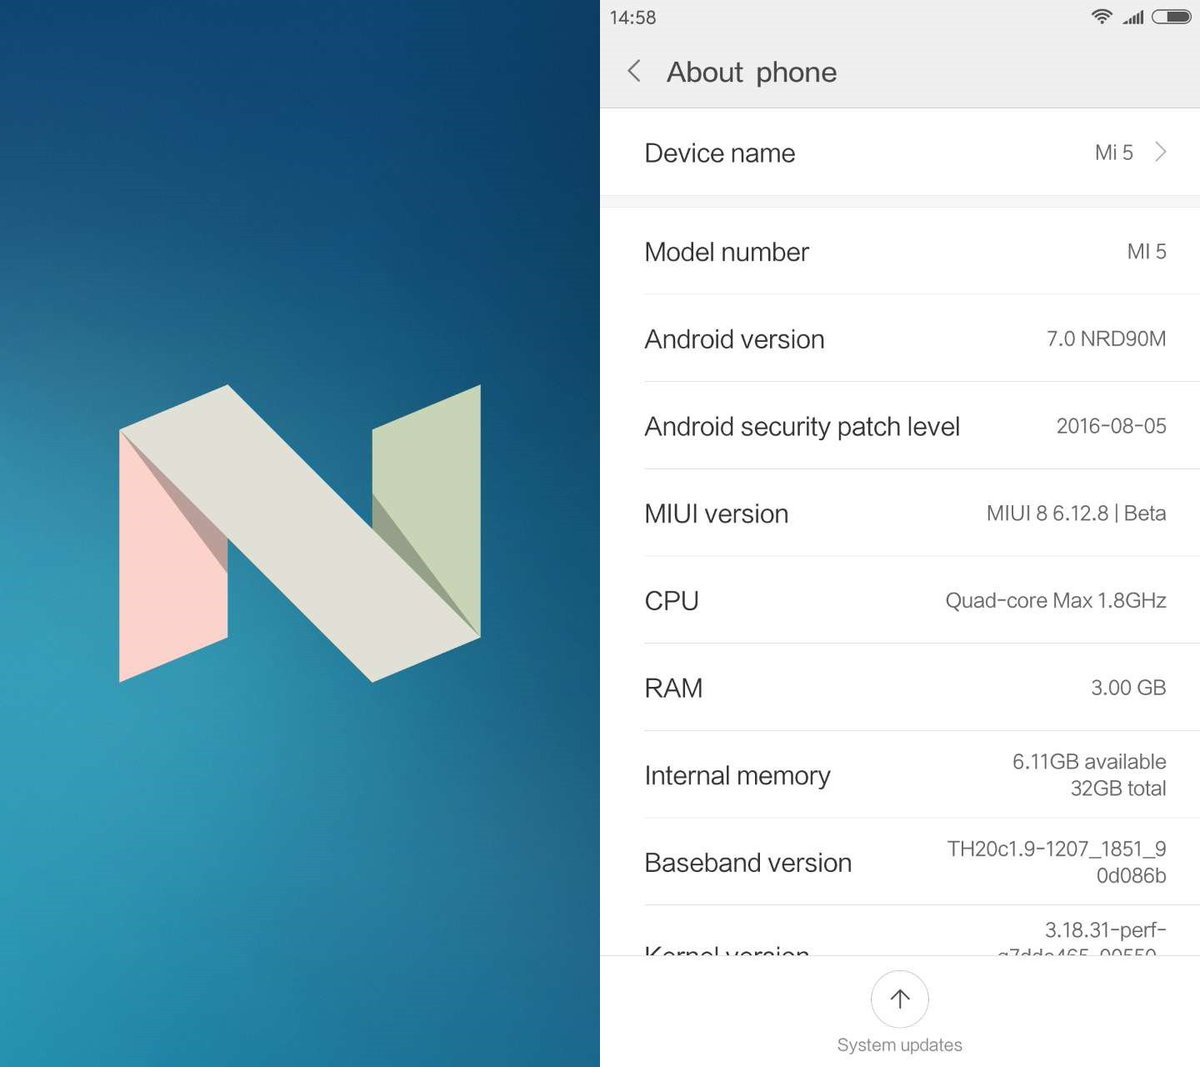 Miui On Twitter Miui 8 China Developer Rom 6 12 8 Based On Android 7 0 For Mi 5 Has Been Released Download Here Https T Co Clga8jmrye Https T Co Yspeg12gyx